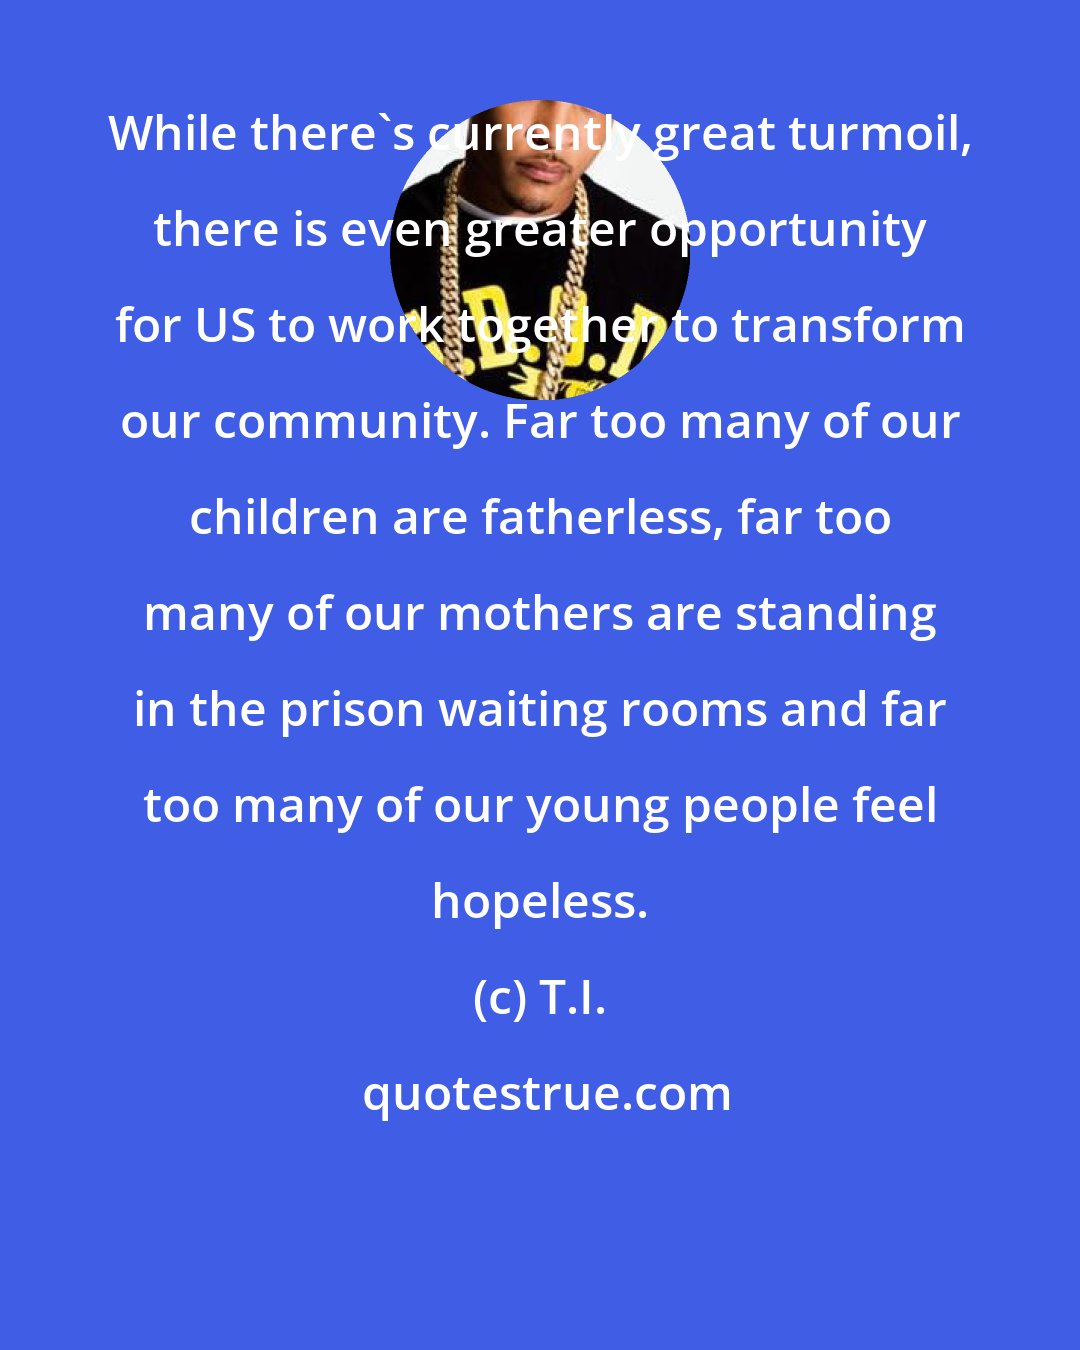 T.I.: While there's currently great turmoil, there is even greater opportunity for US to work together to transform our community. Far too many of our children are fatherless, far too many of our mothers are standing in the prison waiting rooms and far too many of our young people feel hopeless.